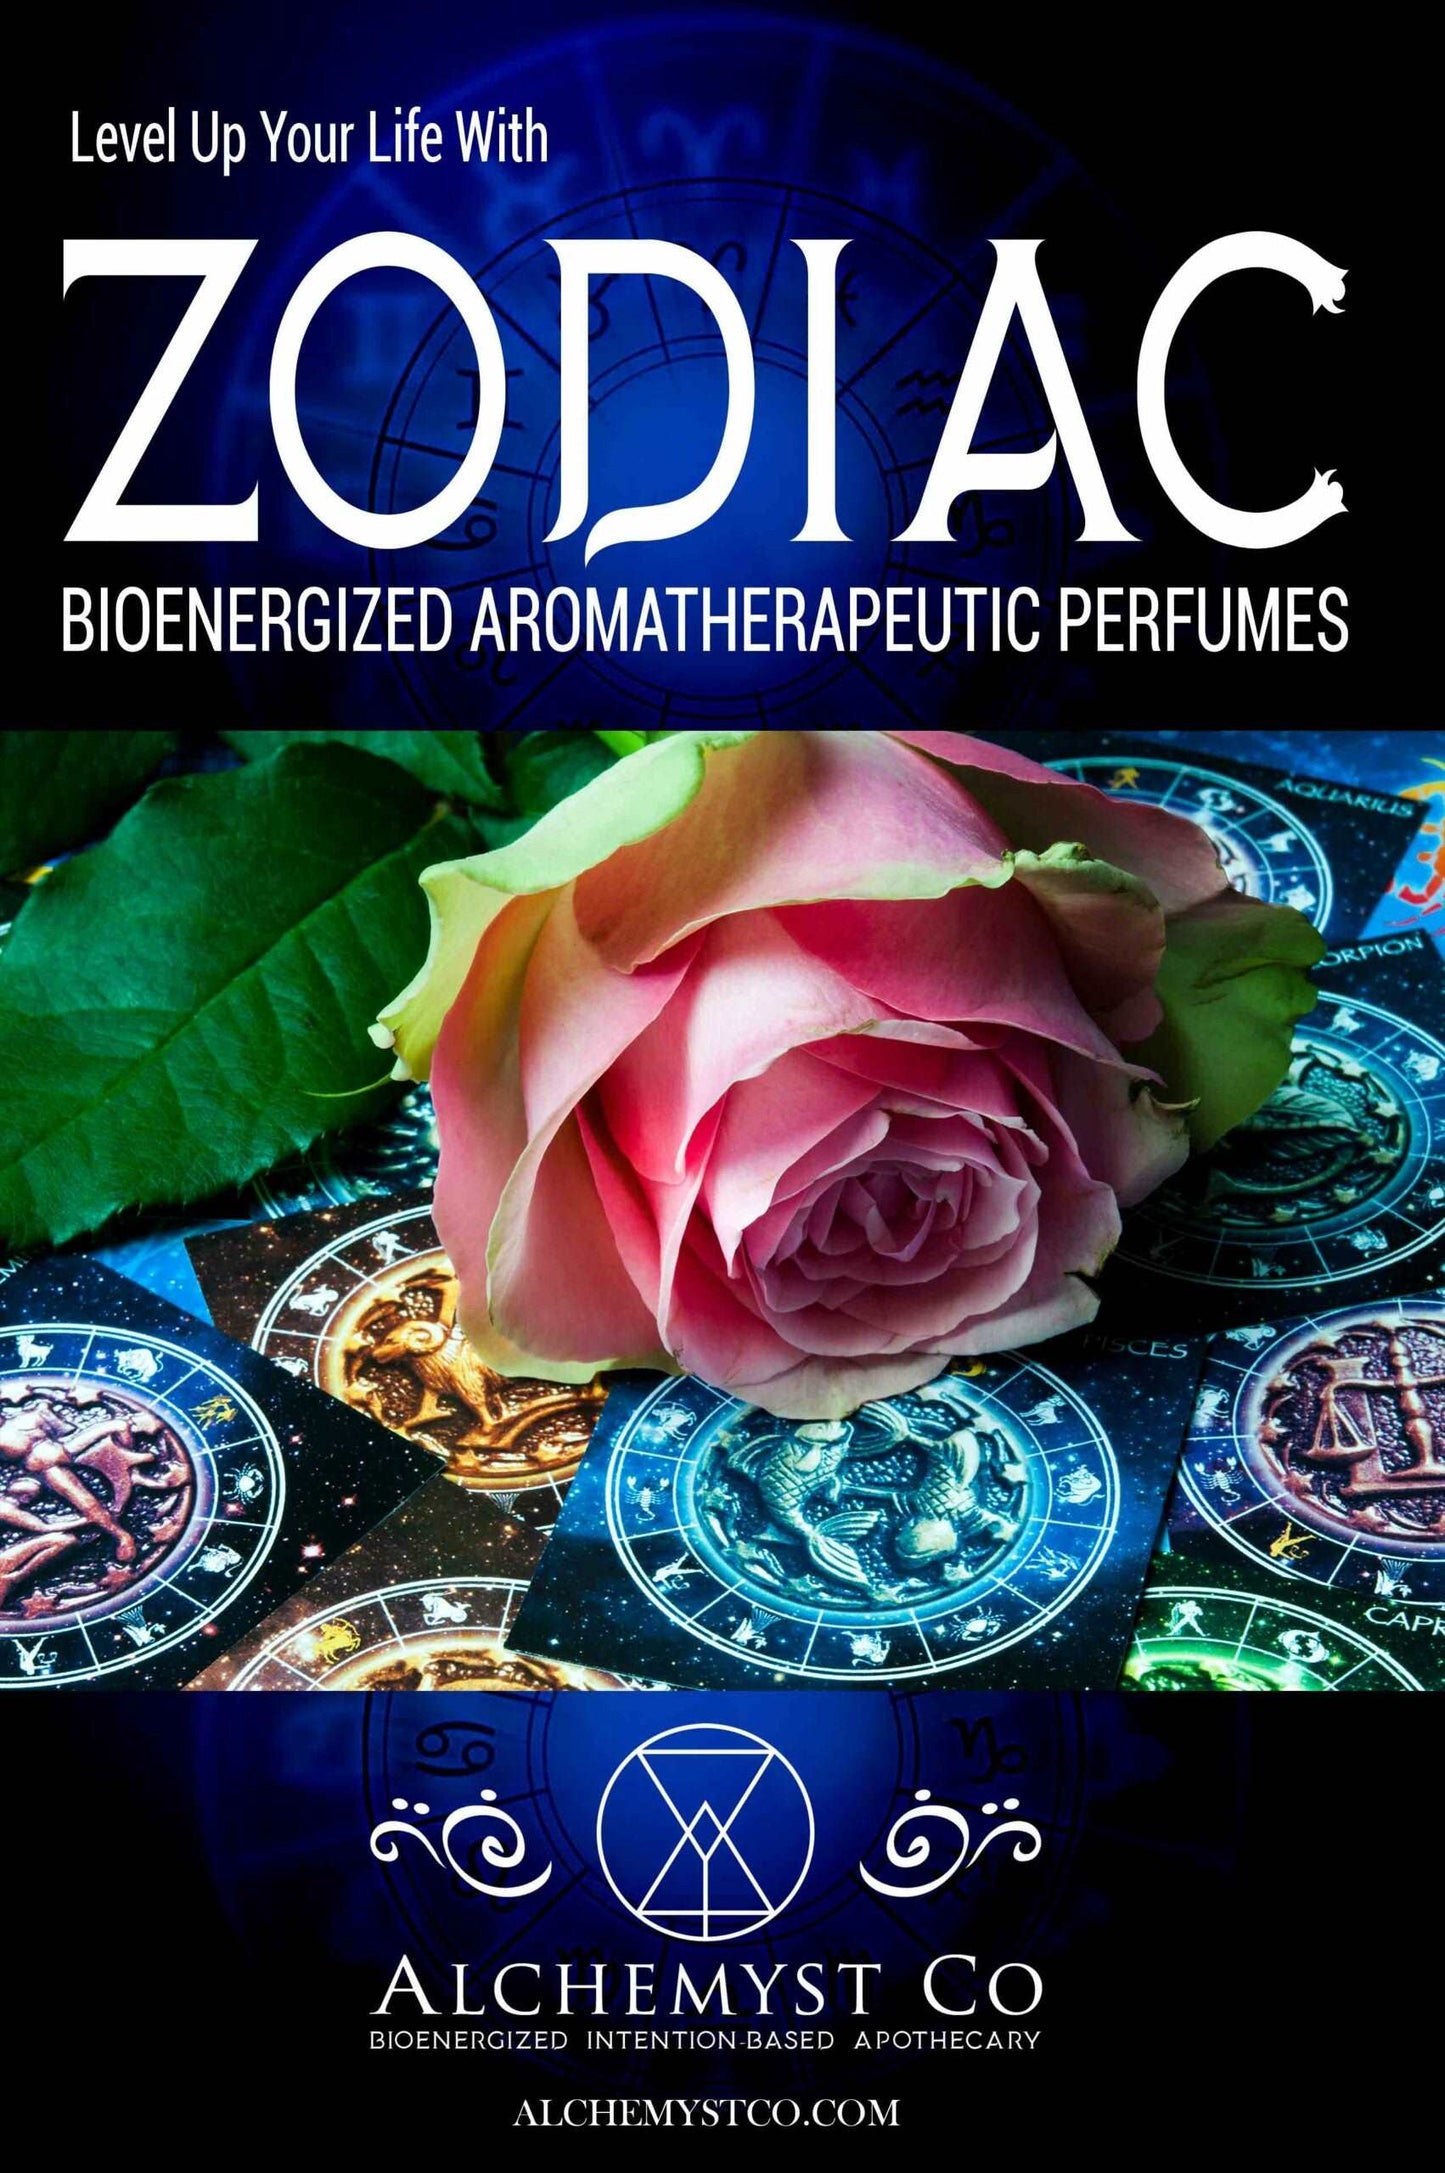 Zodiac Bioenegized Aromatherapy Perfumes for the 12 Astrology Signs Alchemyst Co